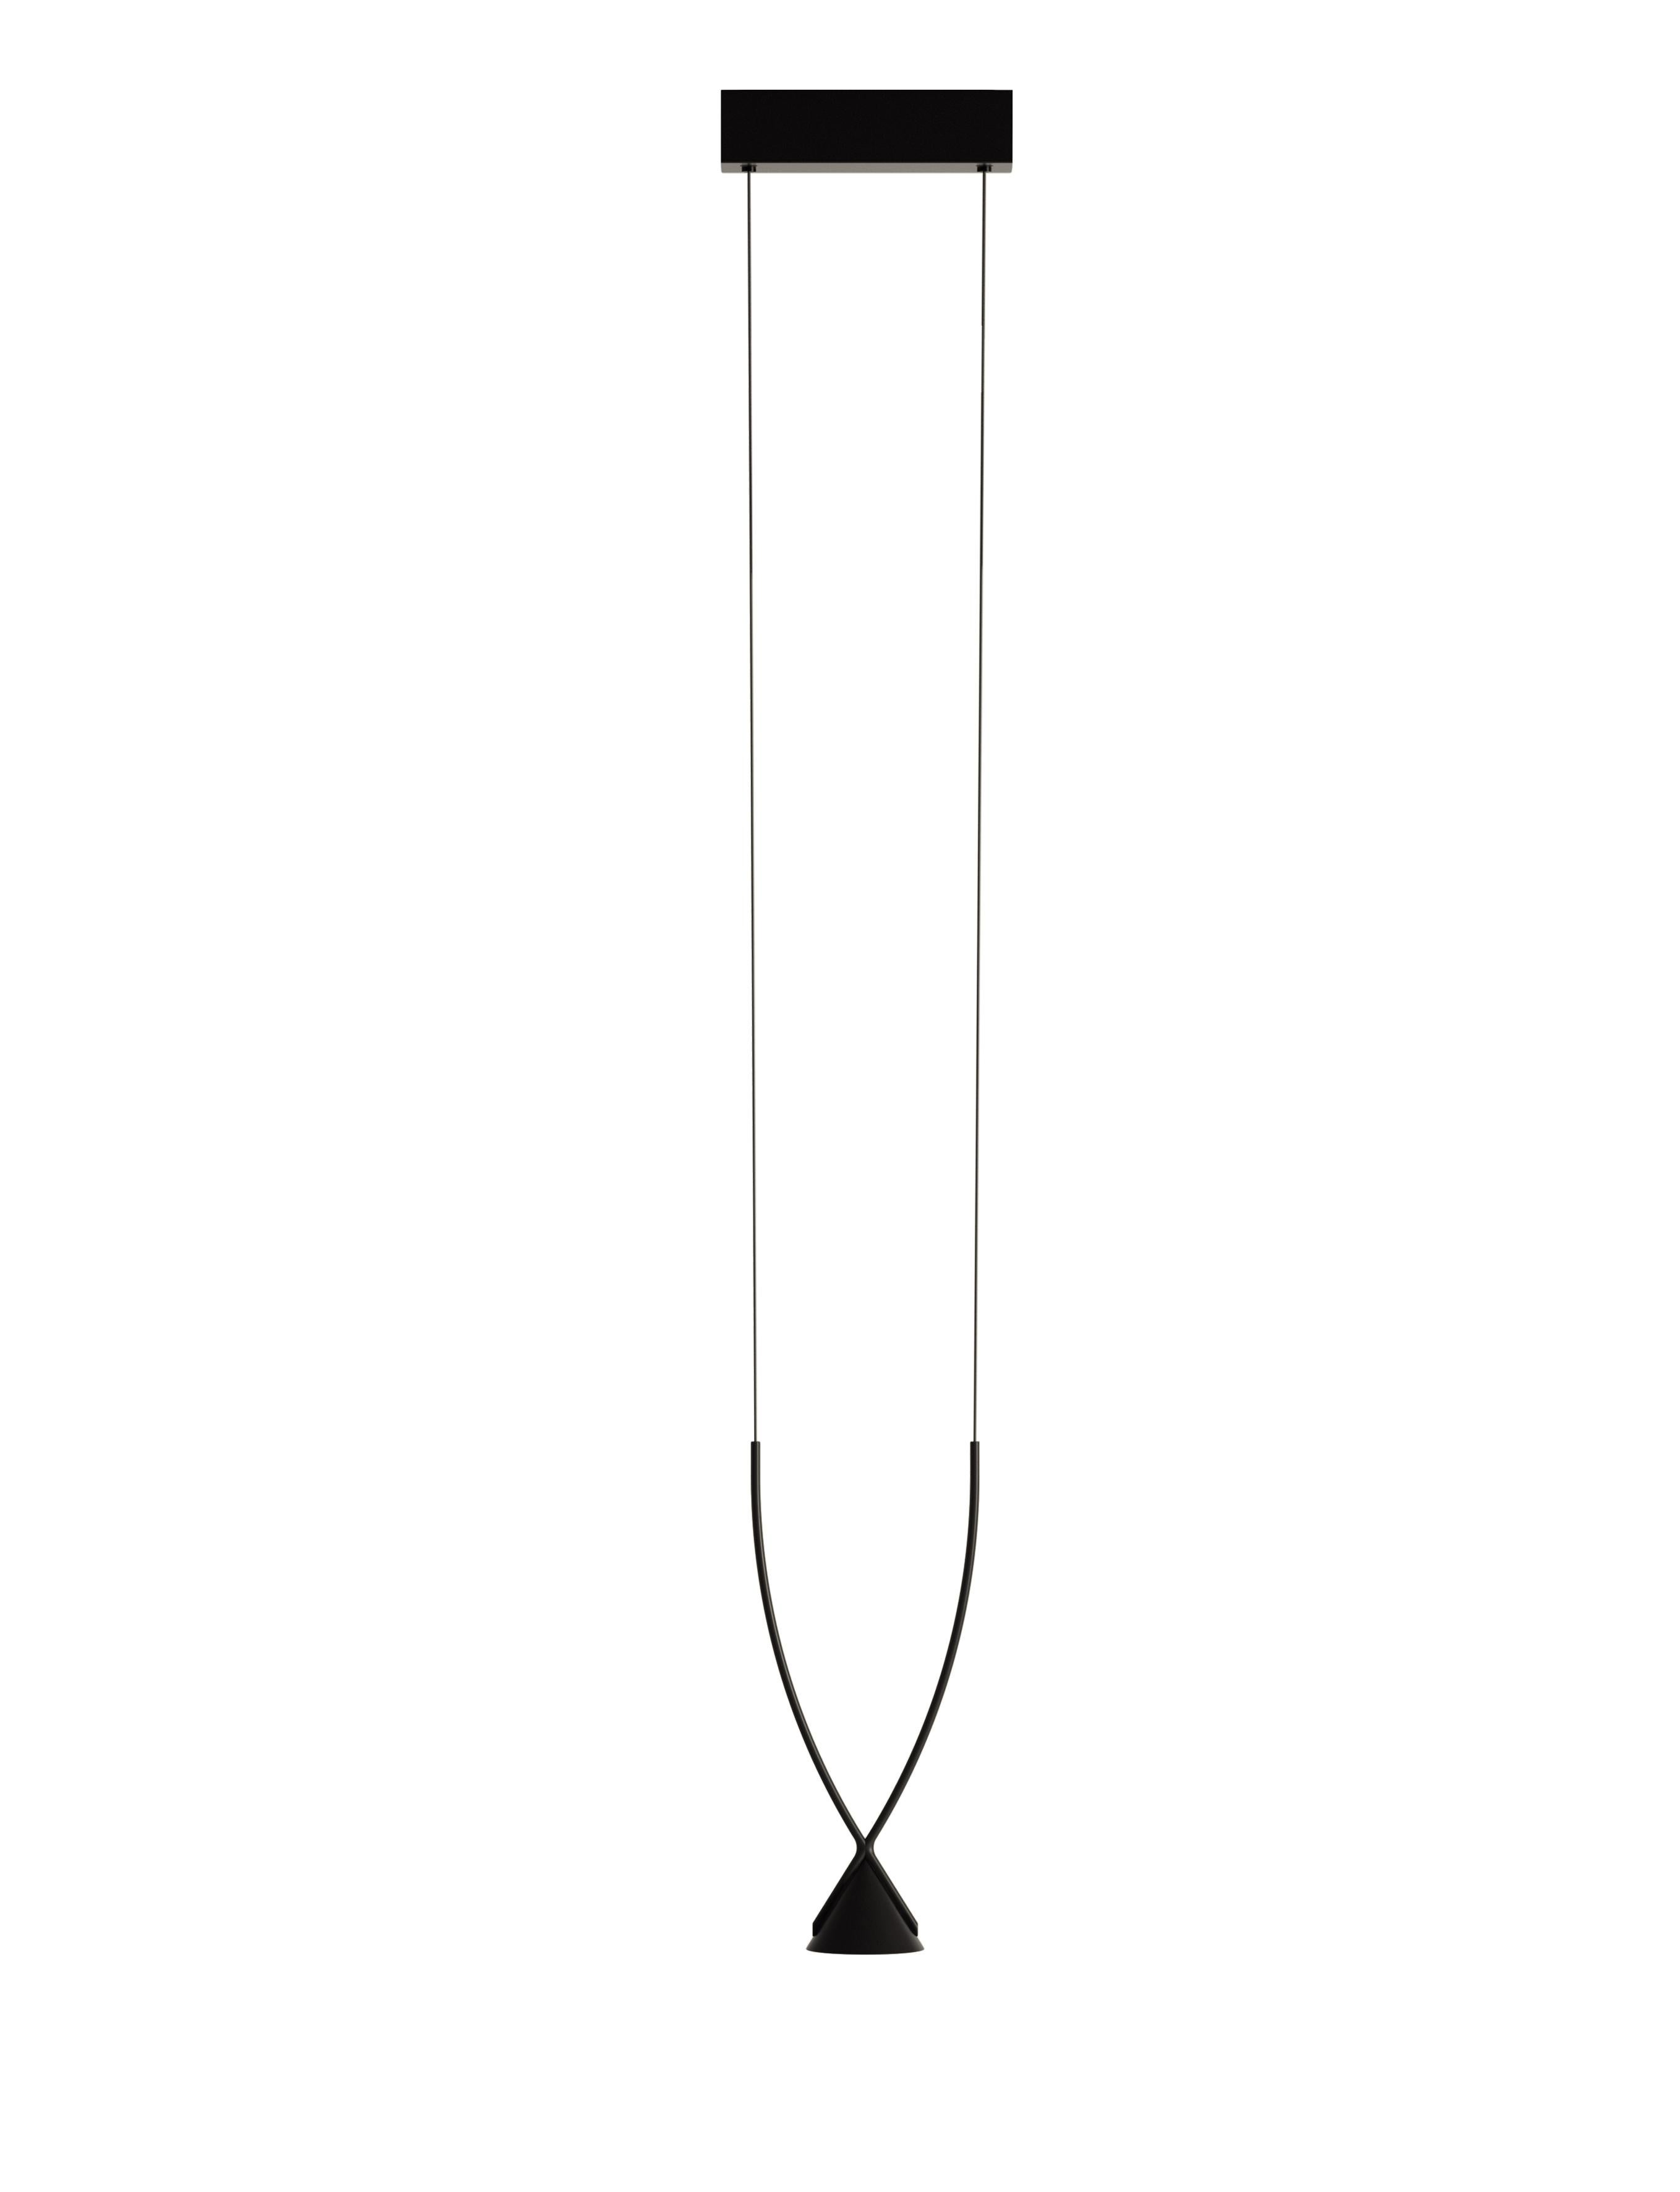 Axolight Jewel Medium 3 Pendant Lamp in Black with Black Finish by Yonoh

Synthesizing is the gift of knowing how to transmit complex things in a simple way. Jewel mono summarizes: minimalism in design and high lighting performance, aesthetic